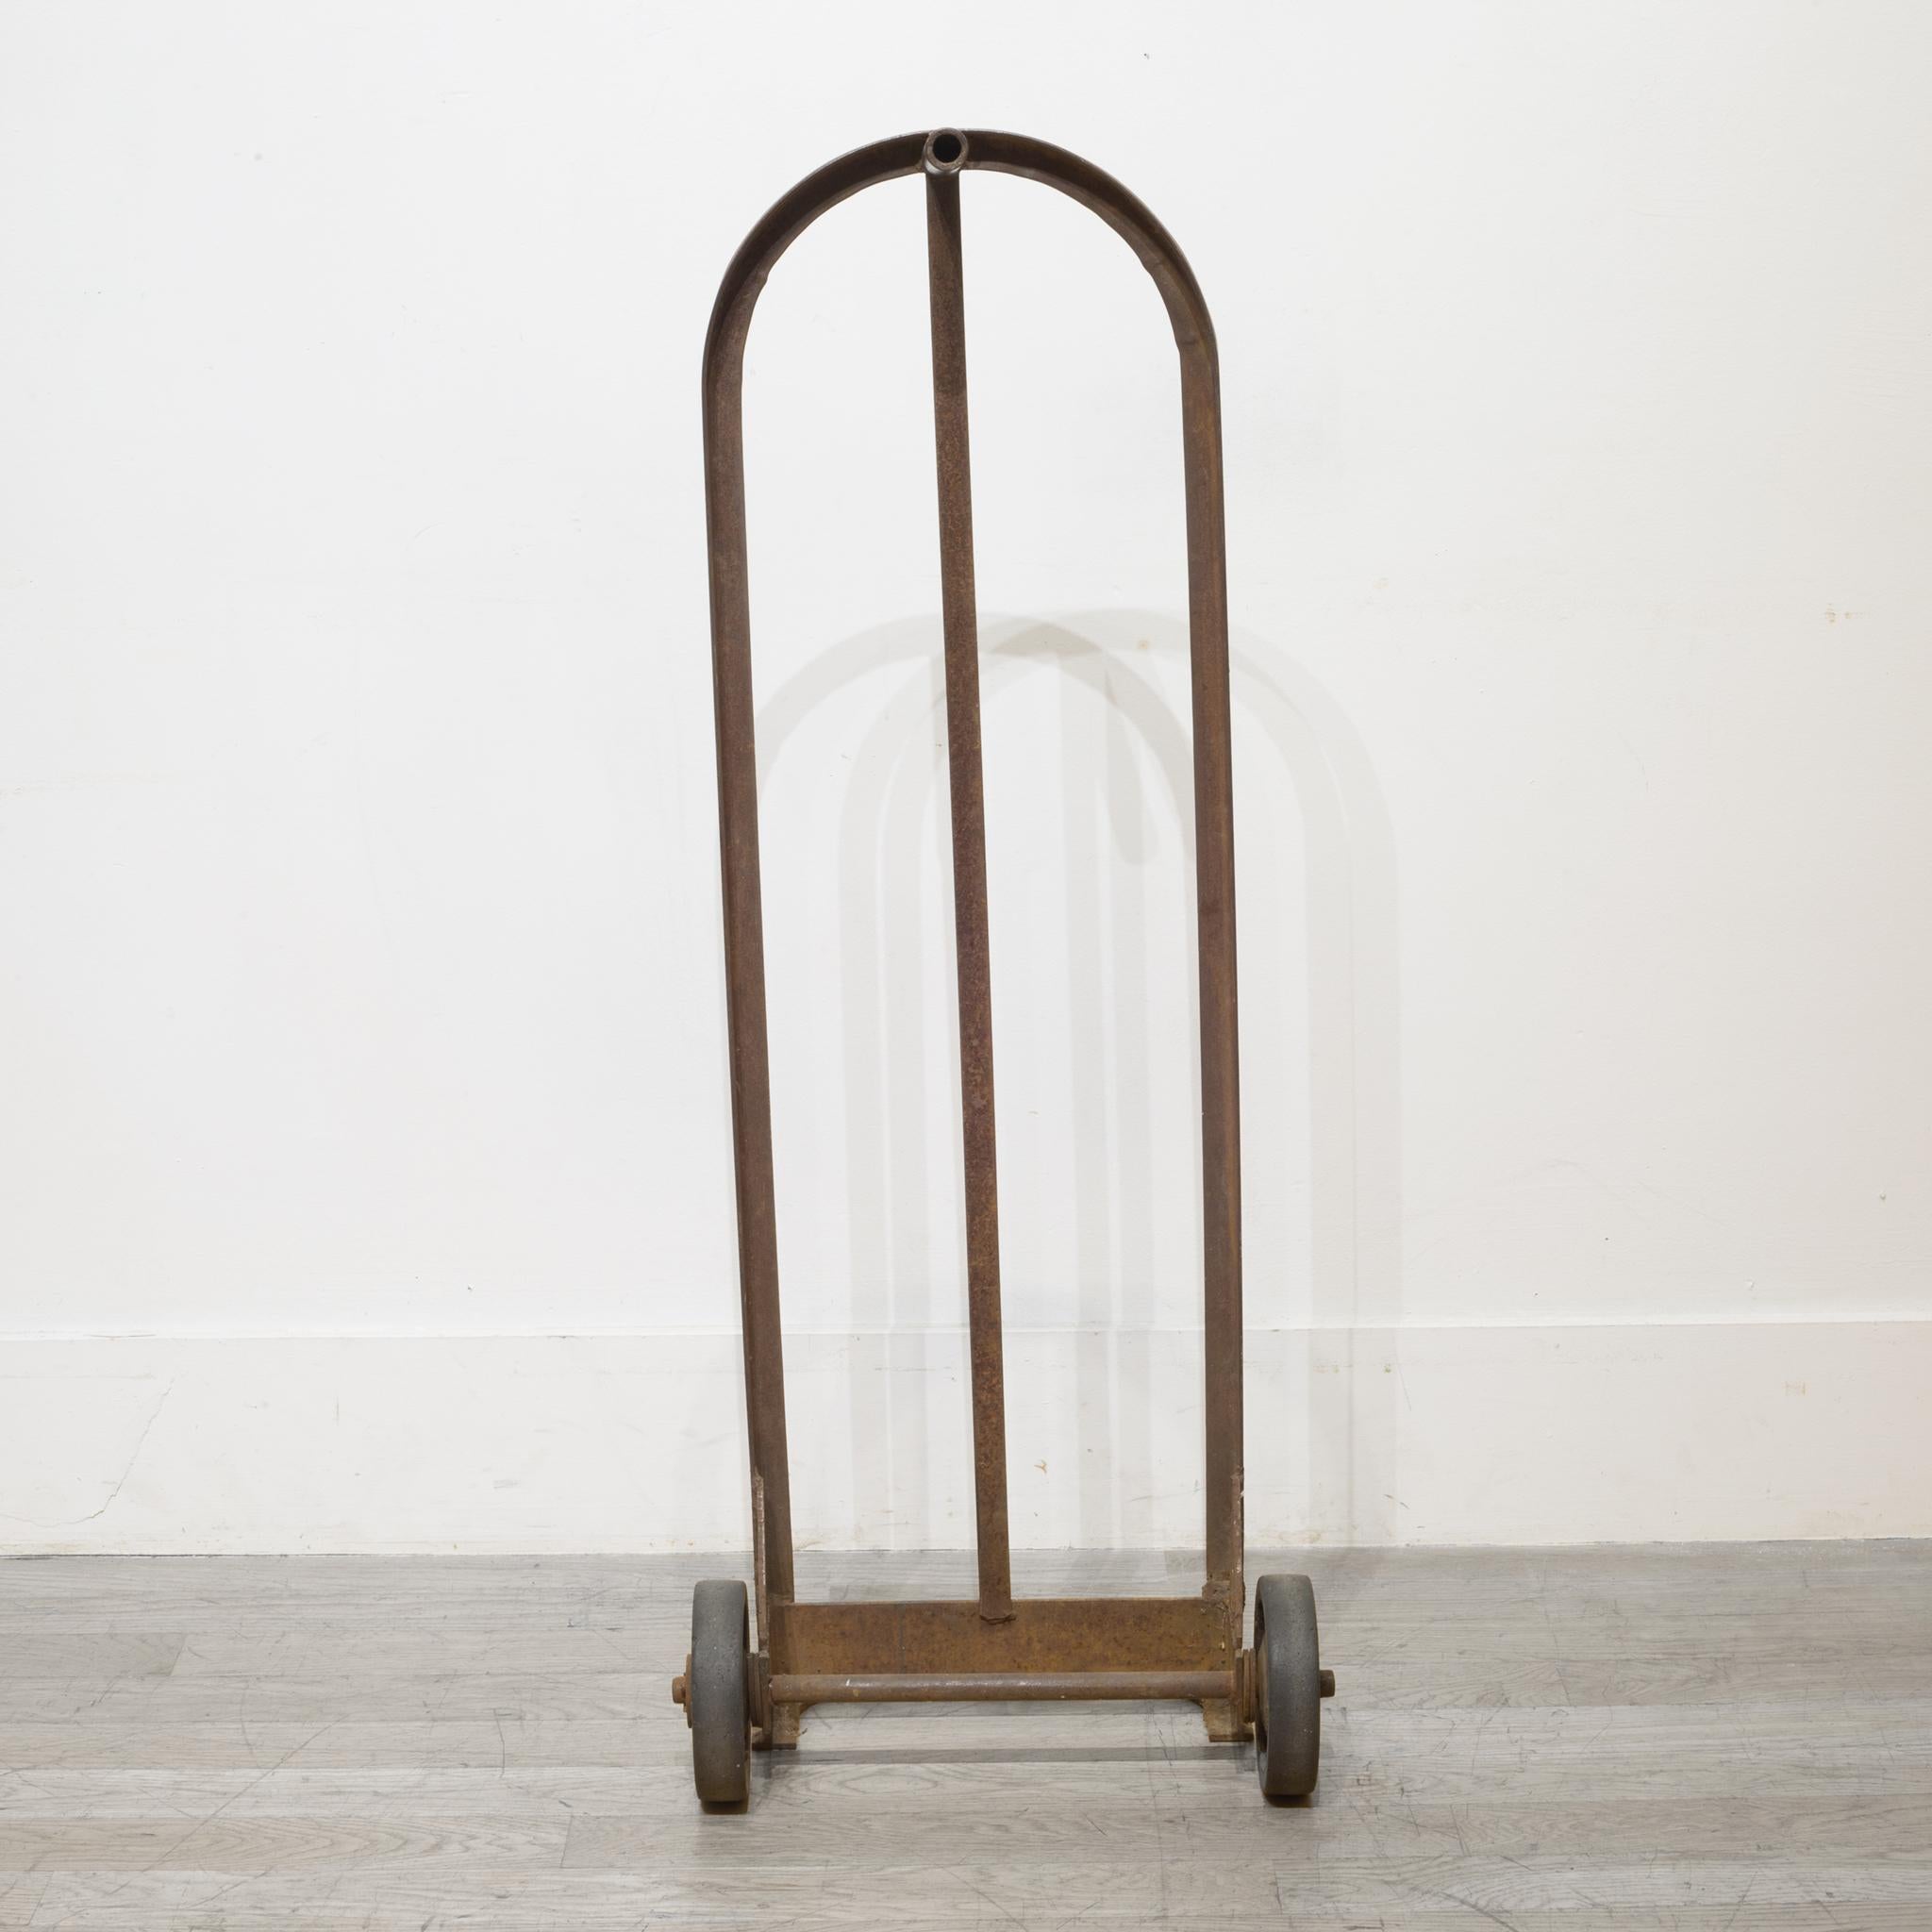 Steel Early 20th Century Industrial Hand Truck, circa 1940